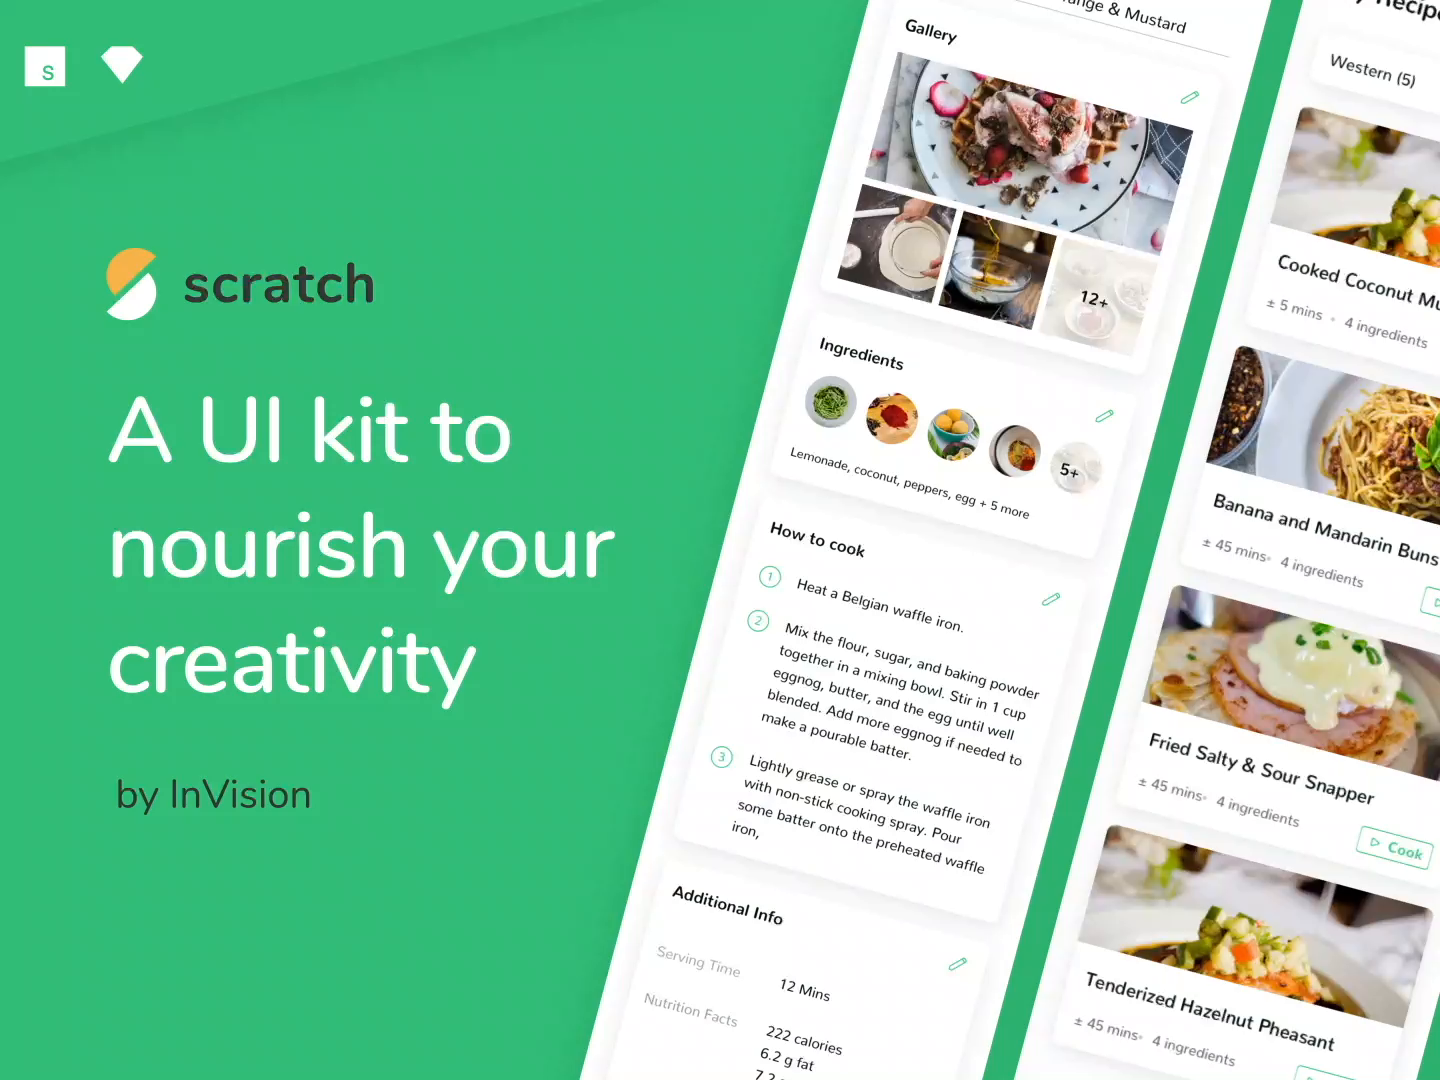 UI Kits design idea #197: Scratch—A UI Kit to nourish your creativity by InVision